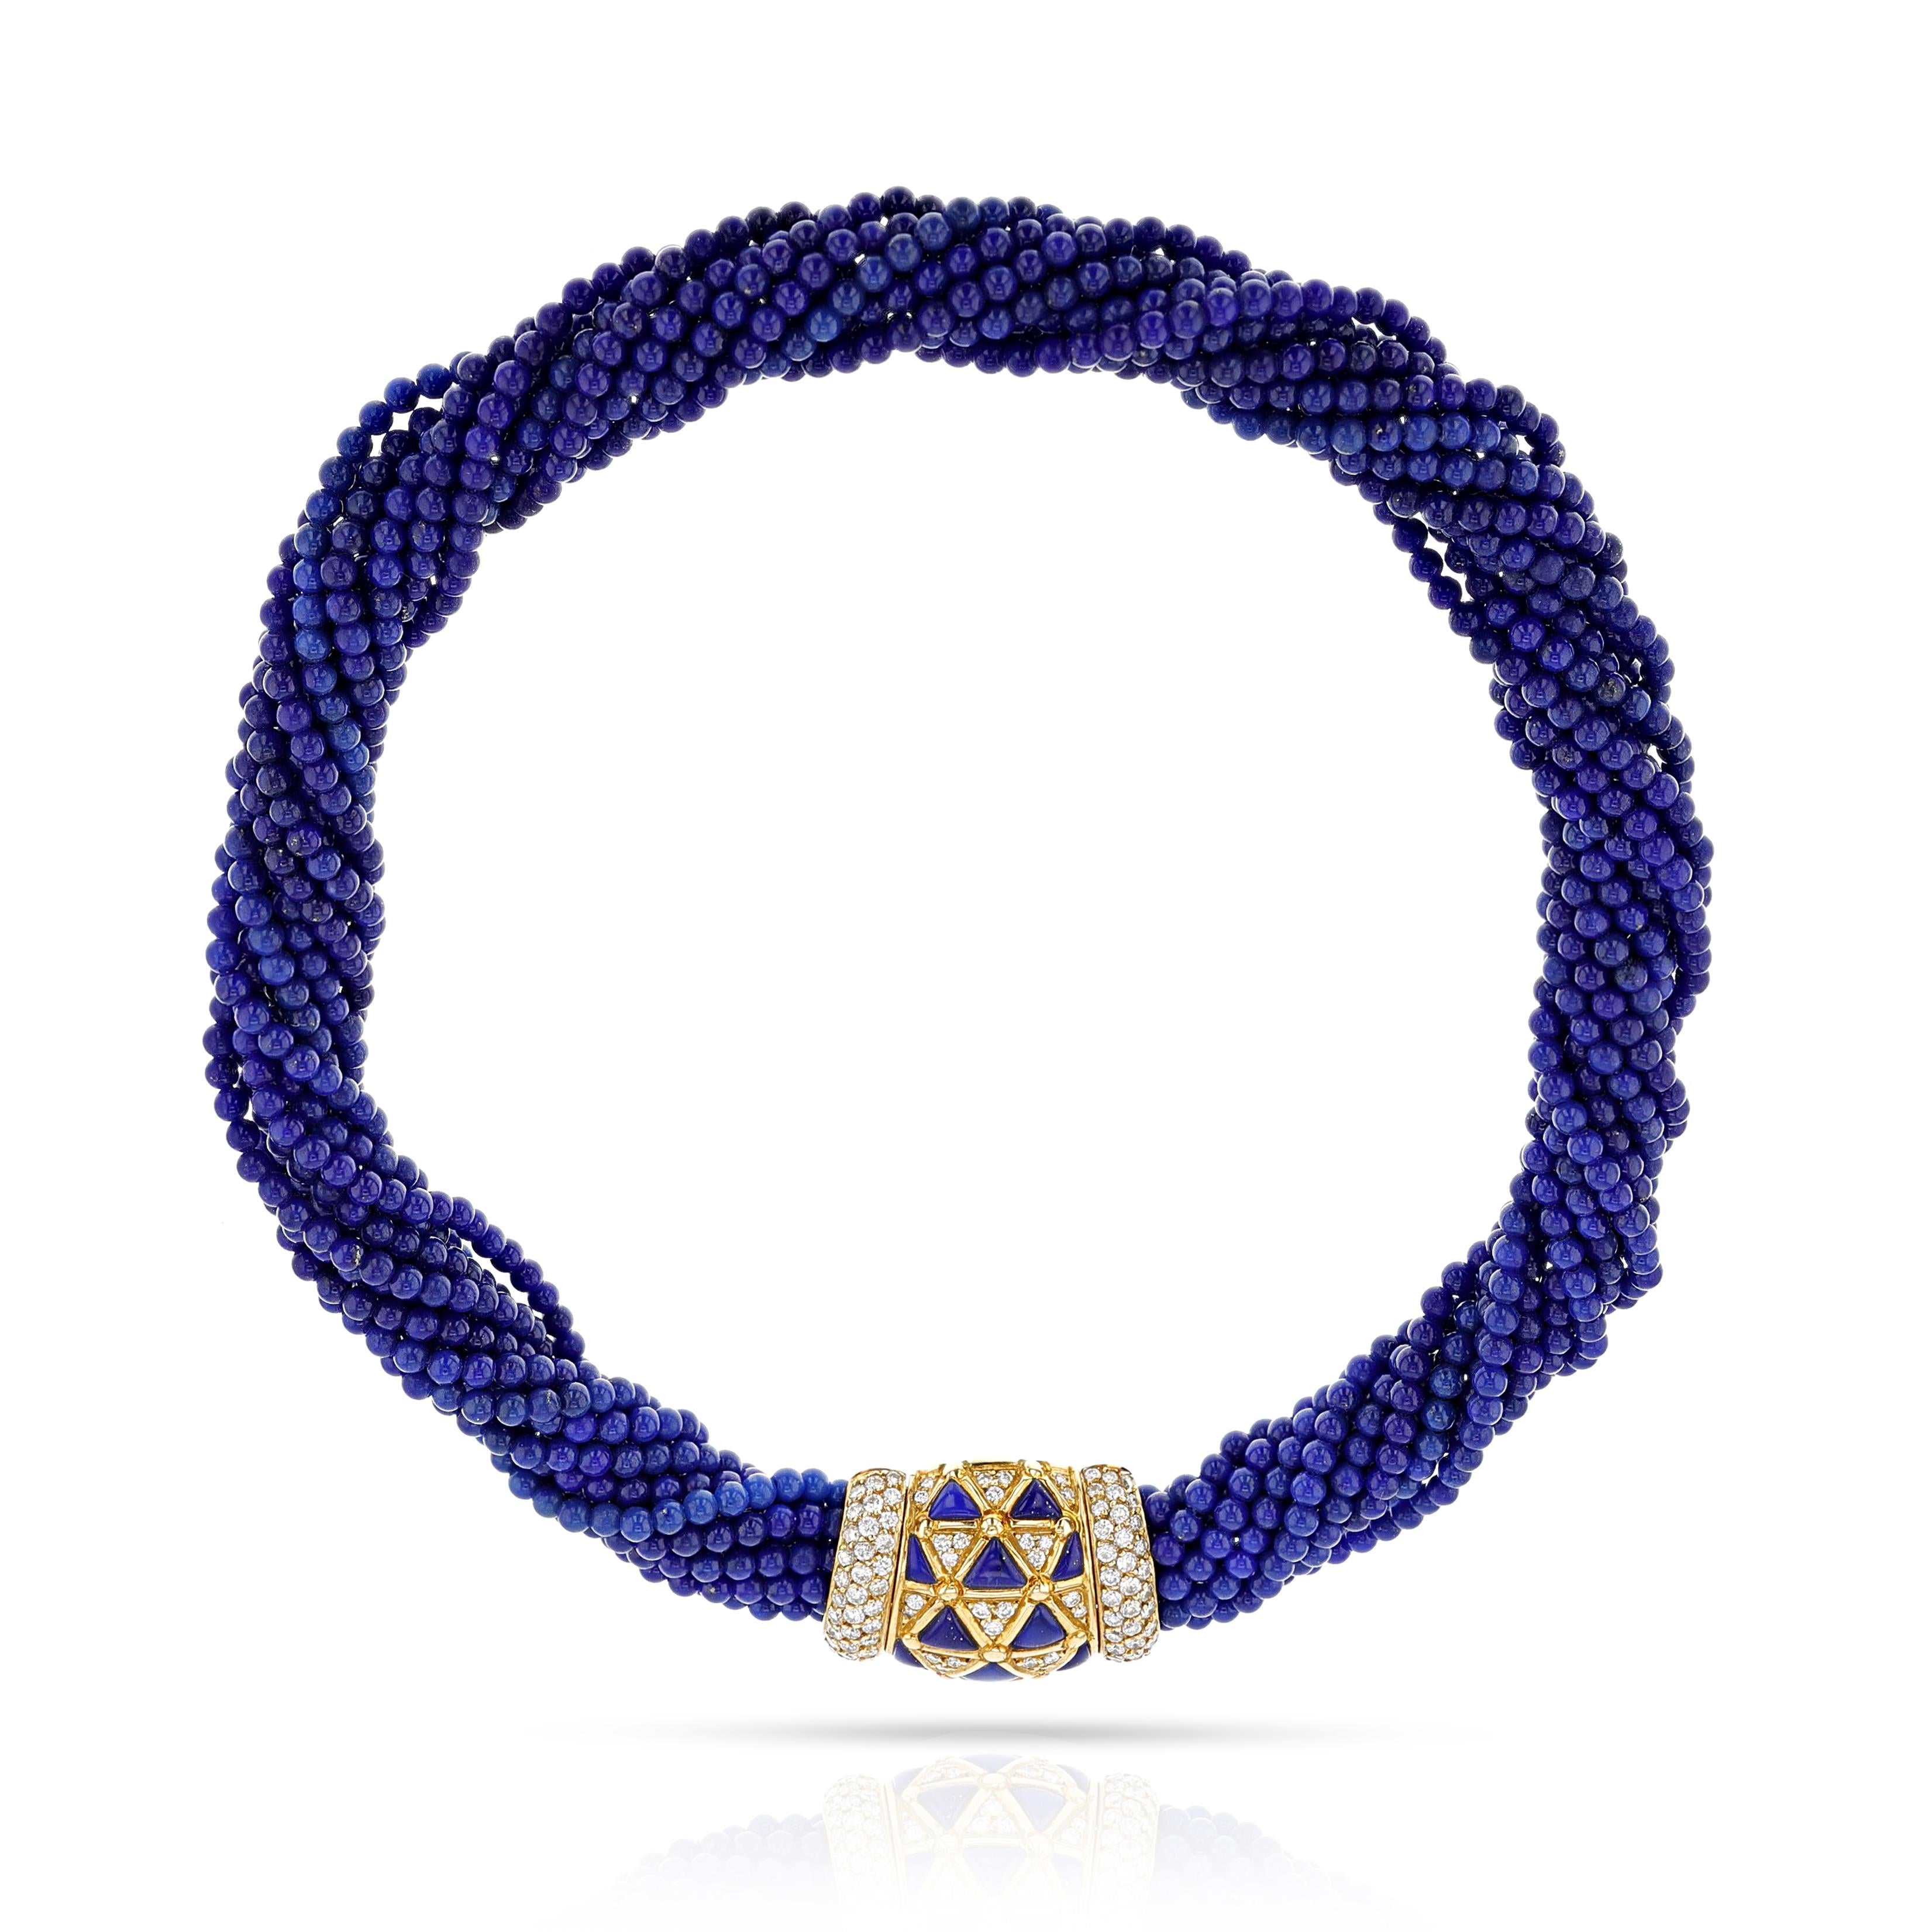 An extremely rare Van Cleef & Arpels French Lapis Lazuli & Diamond Necklace, Earring, Ring, Bangle Set. 

The ring is set  each with 13 triangular lapis lazuli and brilliant-cut diamonds totaling 0.70 carats. The ring size is 4.75, weighing 15.20